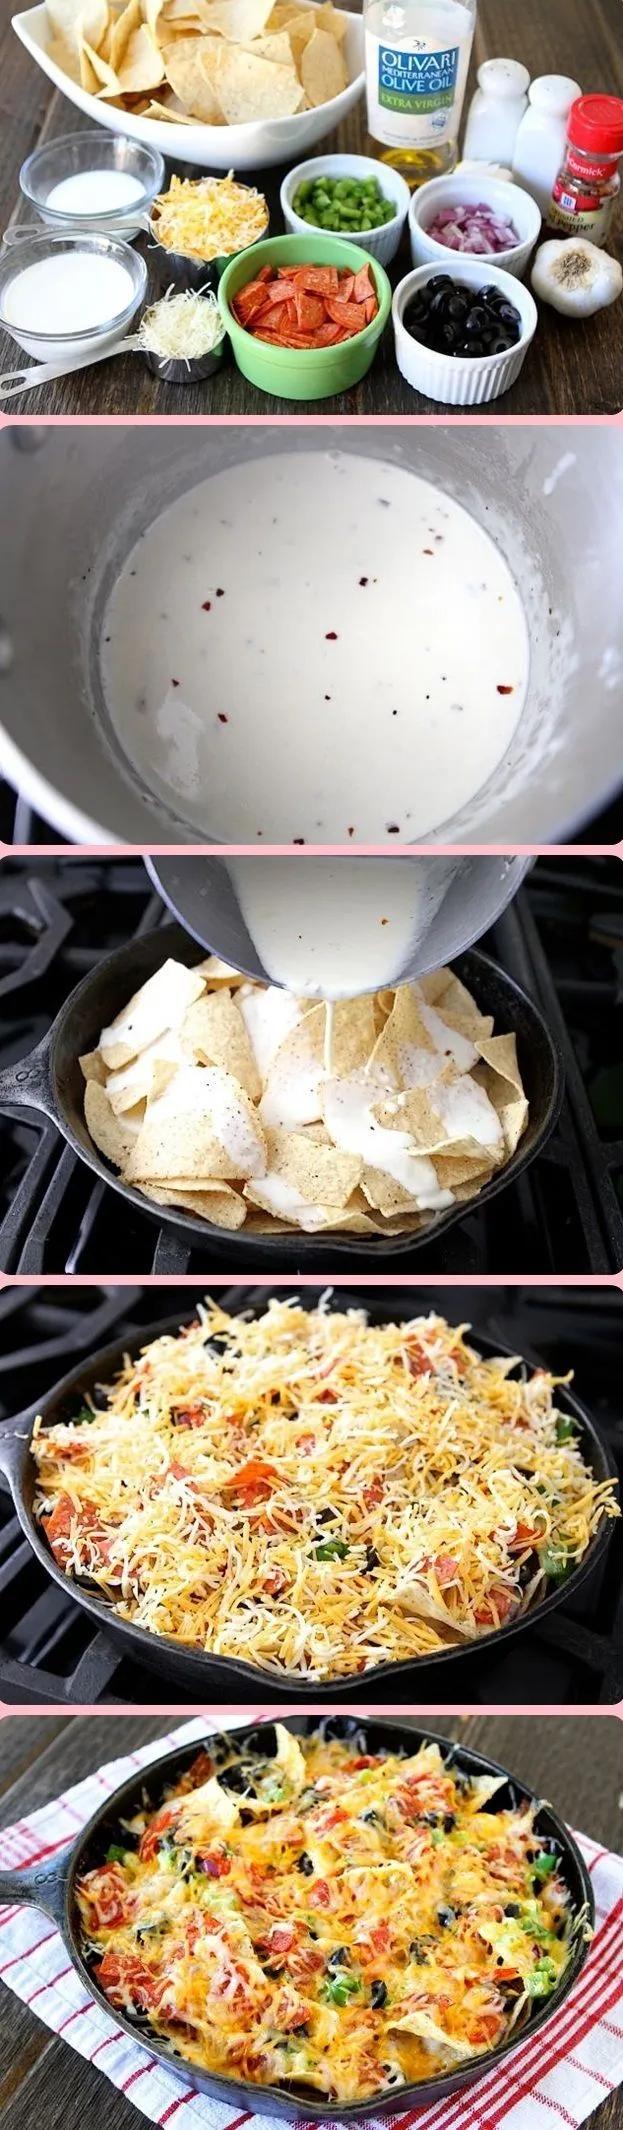 DIY Pizza Nachos Pictures, Photos, and Images for Facebook, Tumblr ...